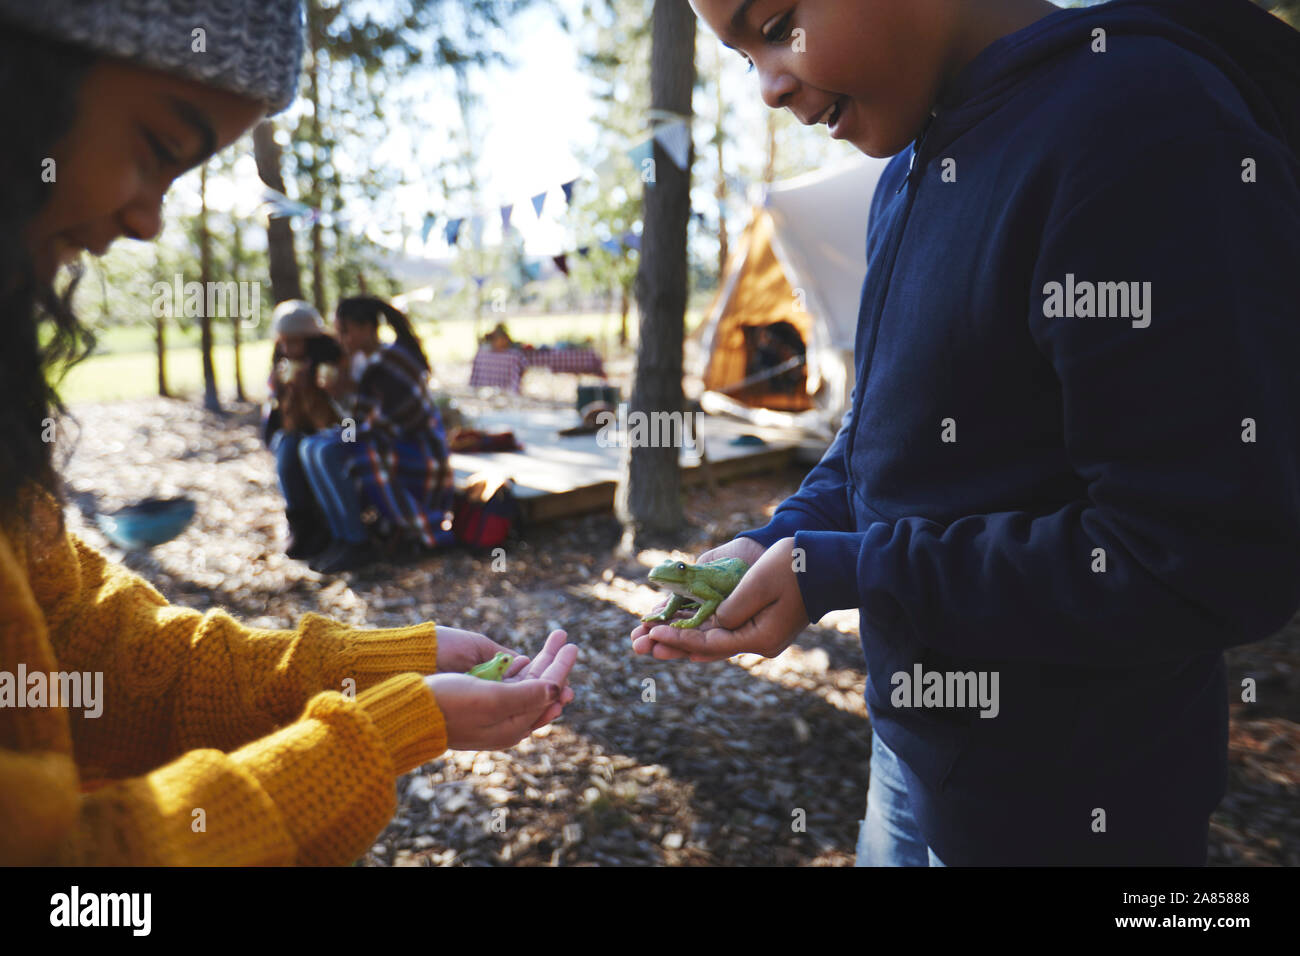 Brother and sister holding tree frogs at campsite in woods Stock Photo